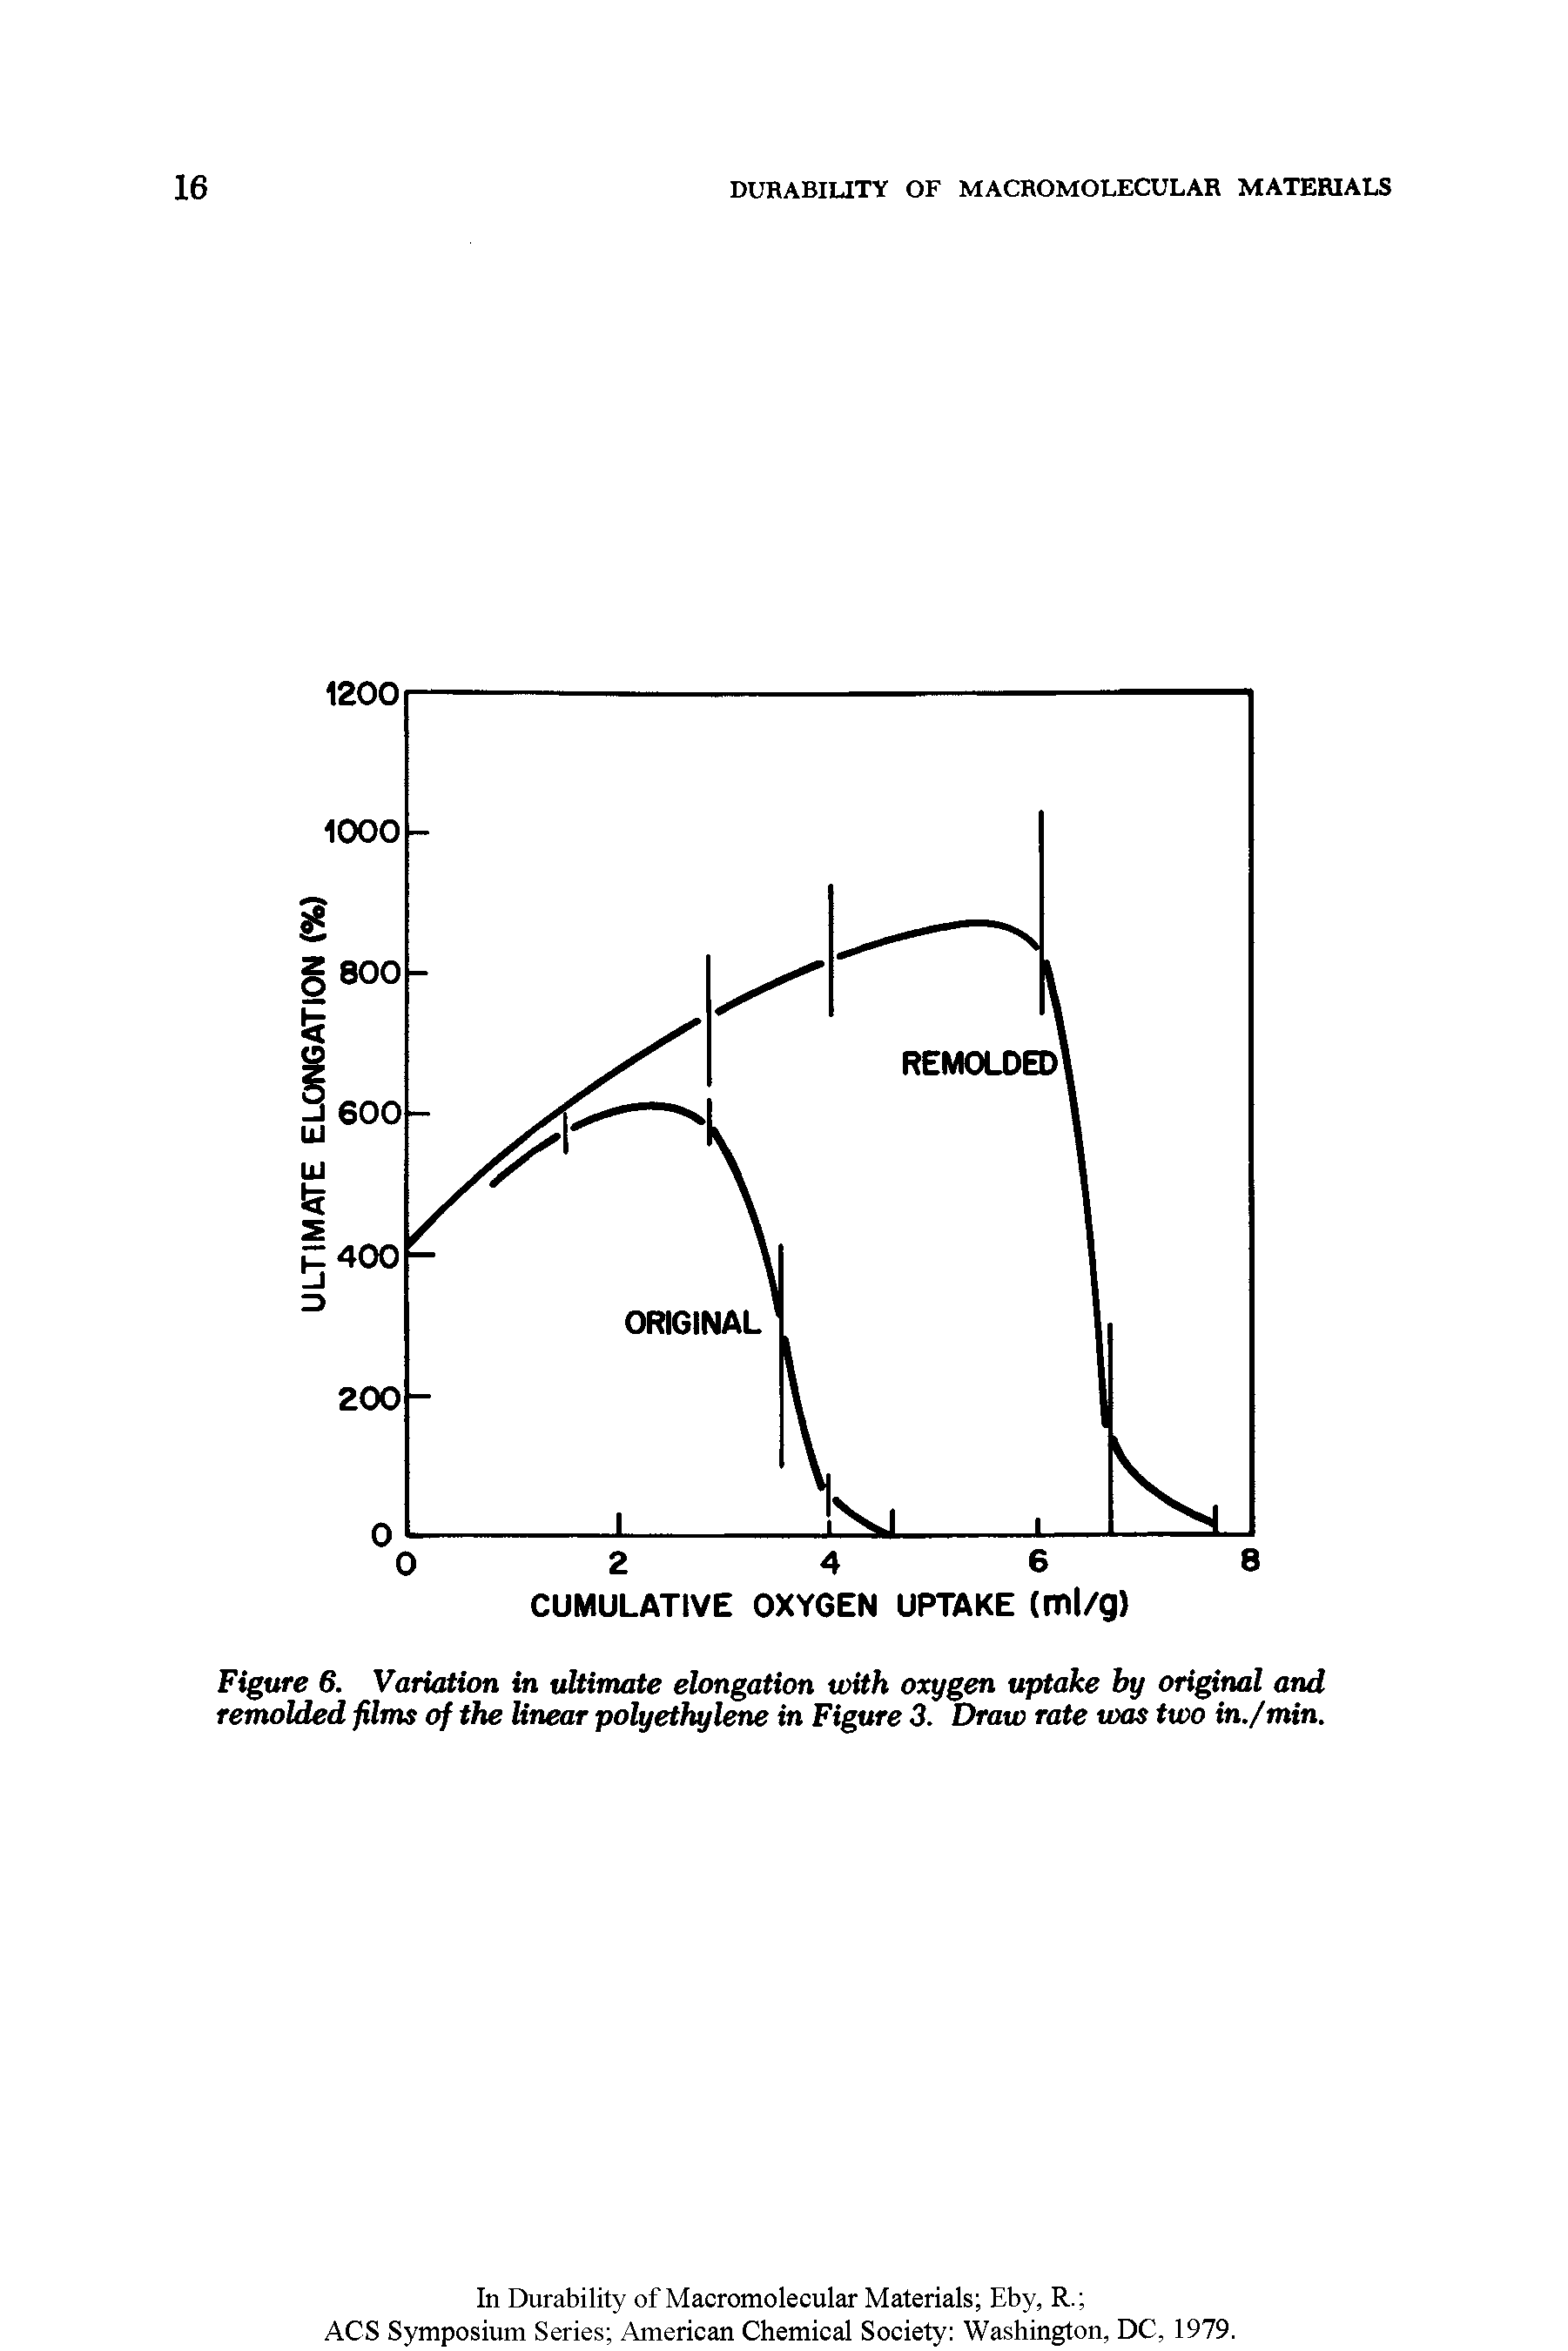 Figure 6. Variation in ulHnutte elongation with oxygen uptake by original and remolded films of the linear polyethyl in Figure 3. Draw rate was two in./min.